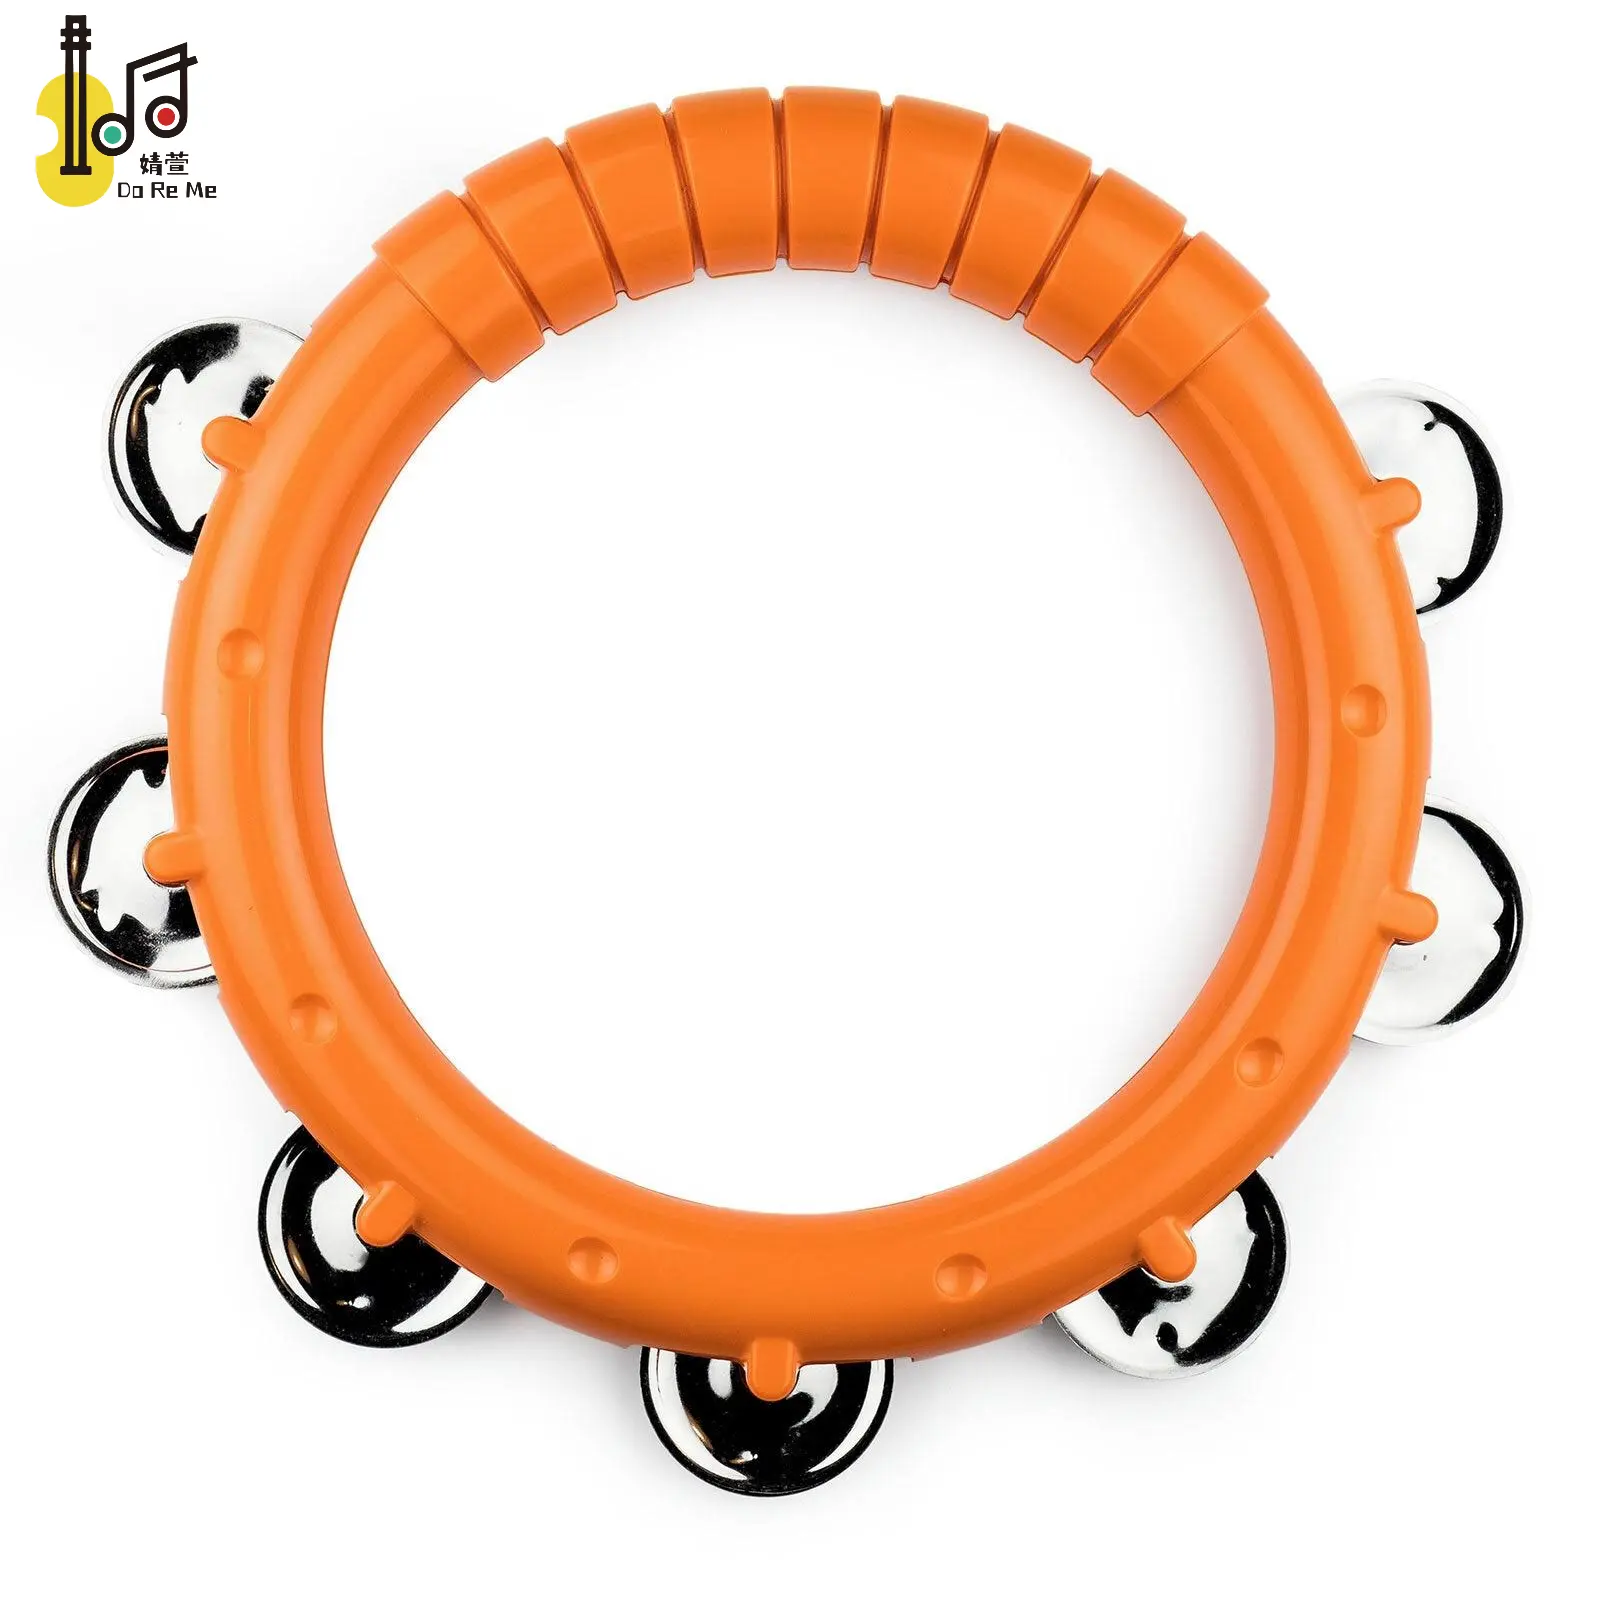 Educated toy music tambourine hand percussion musical instrument hand held tamborin metal jingles gift for kids and adults for s